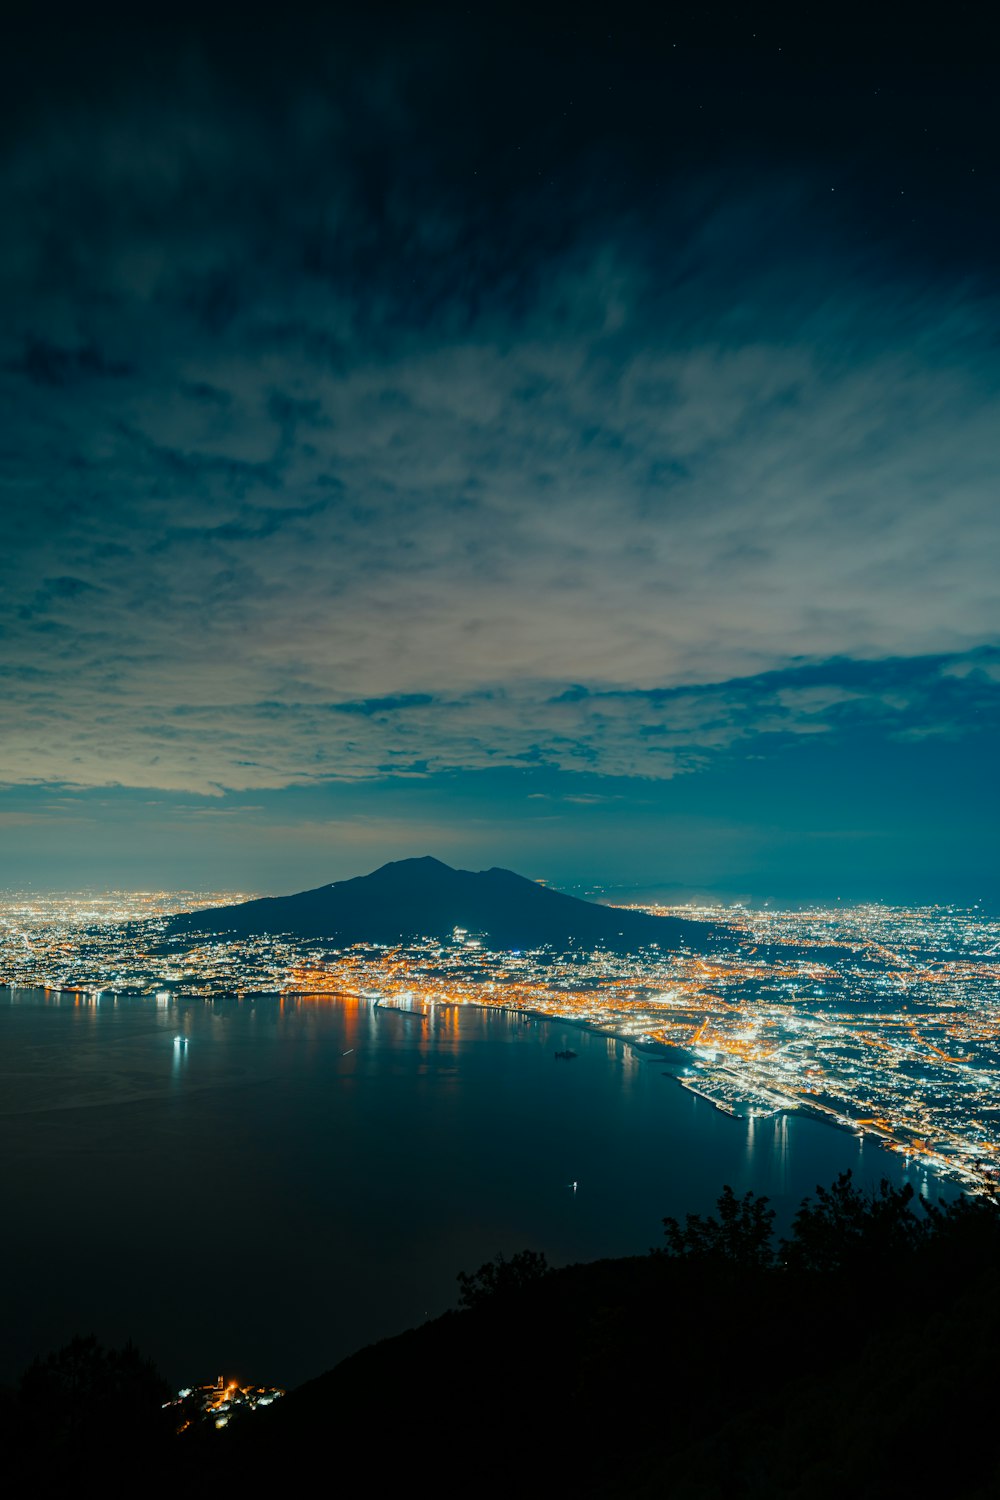 a night view of a city with a mountain in the background